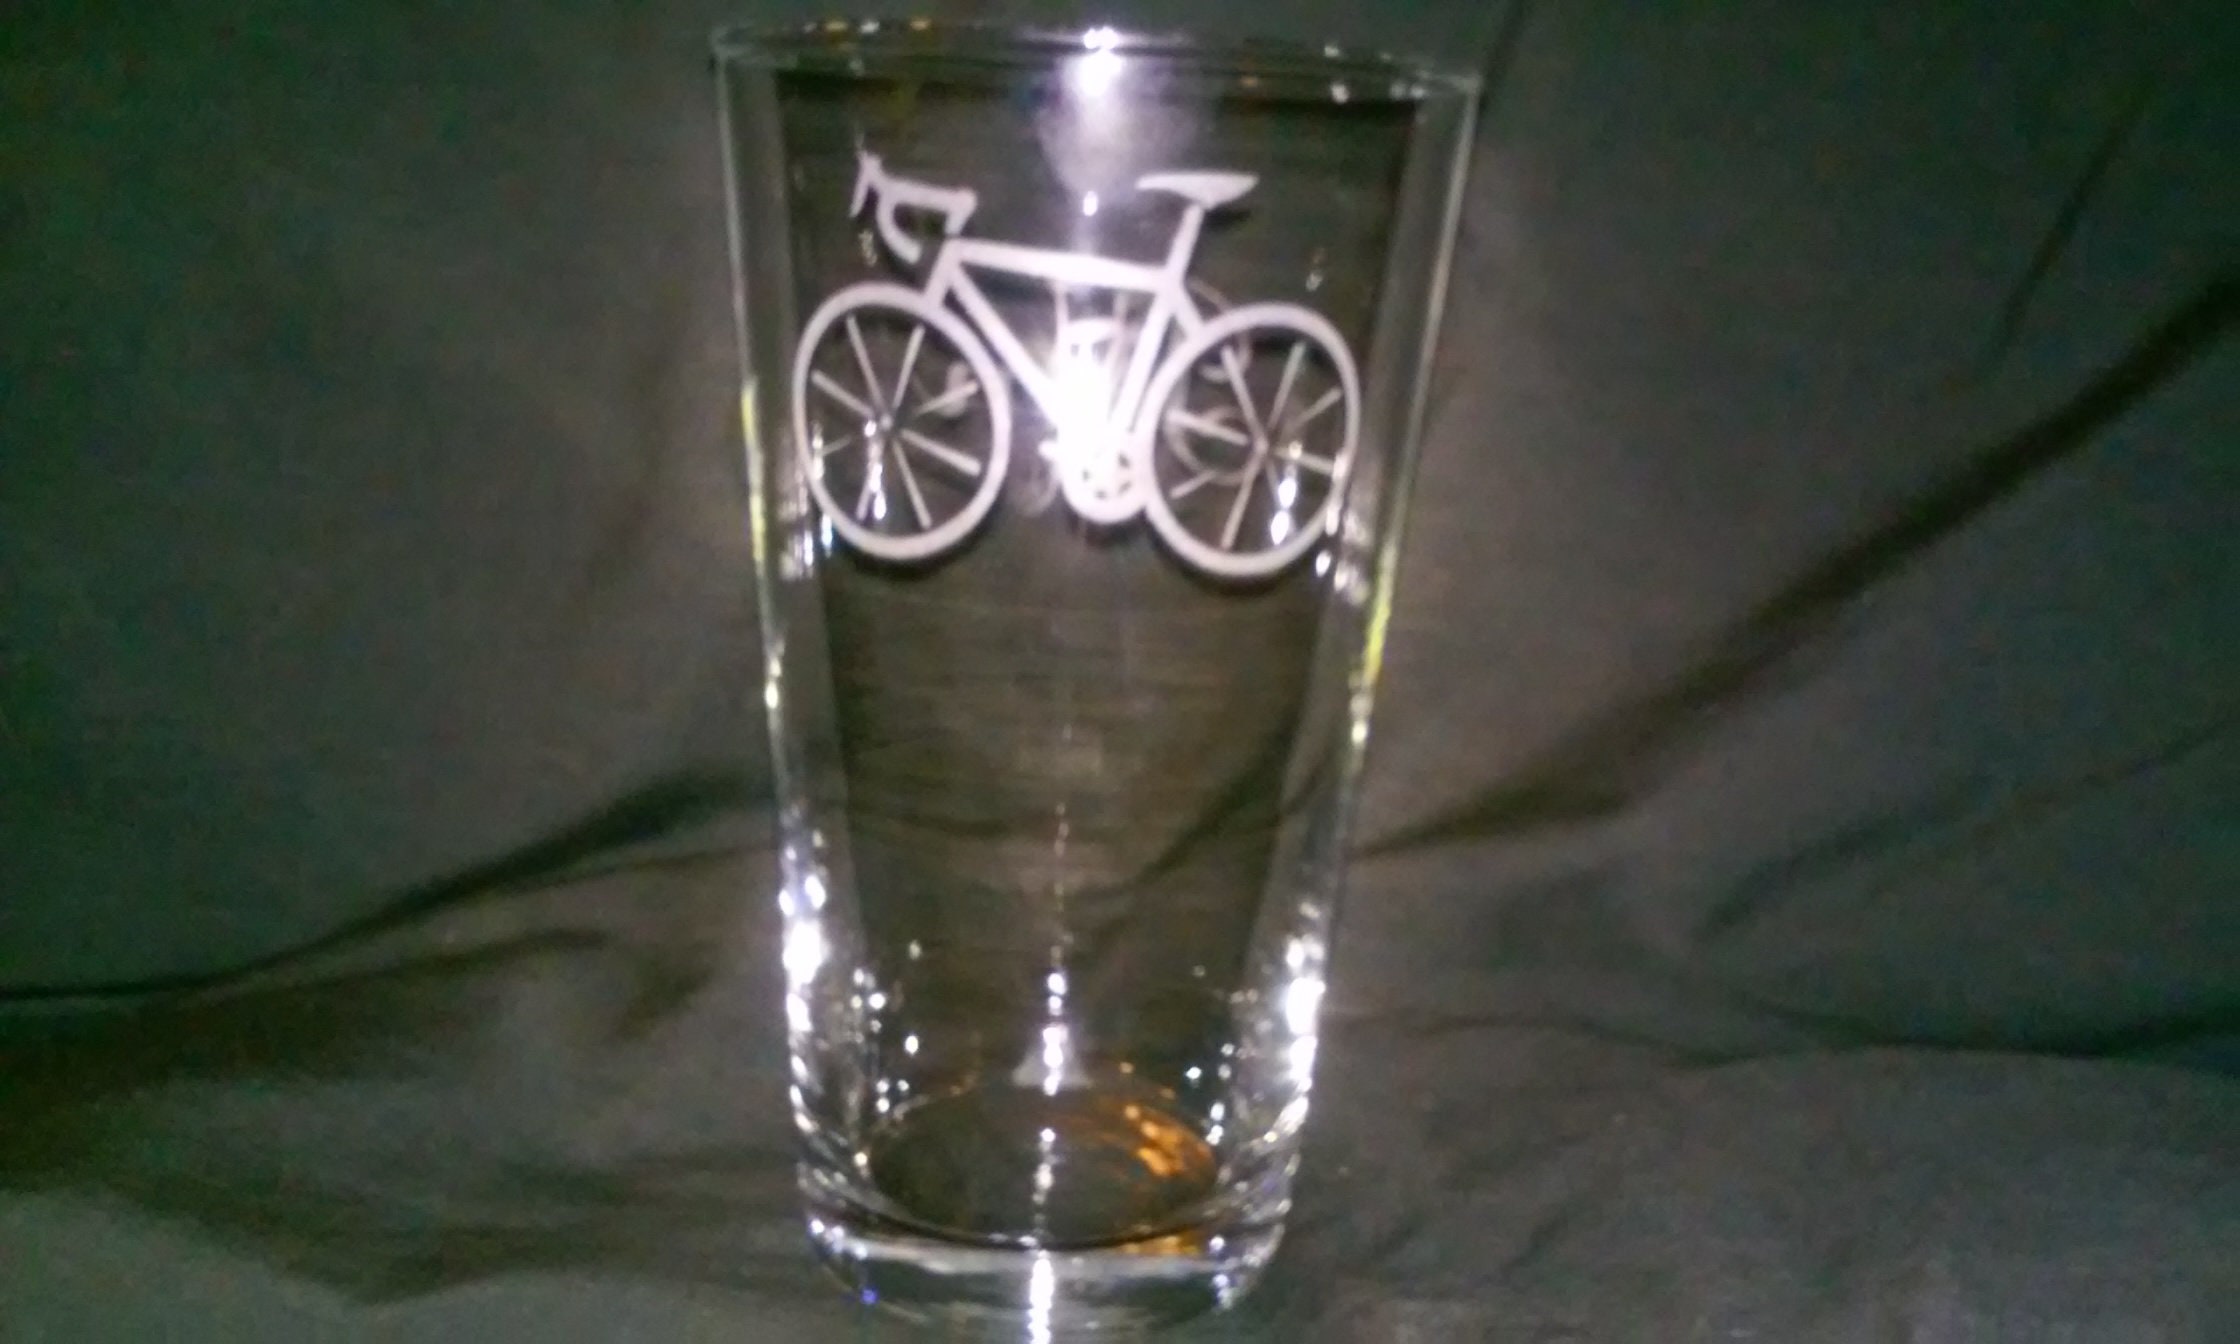 Bicycle - Beer Can Pint Glass - Unique Road Biking Themed Decor and Gi -  bevvee